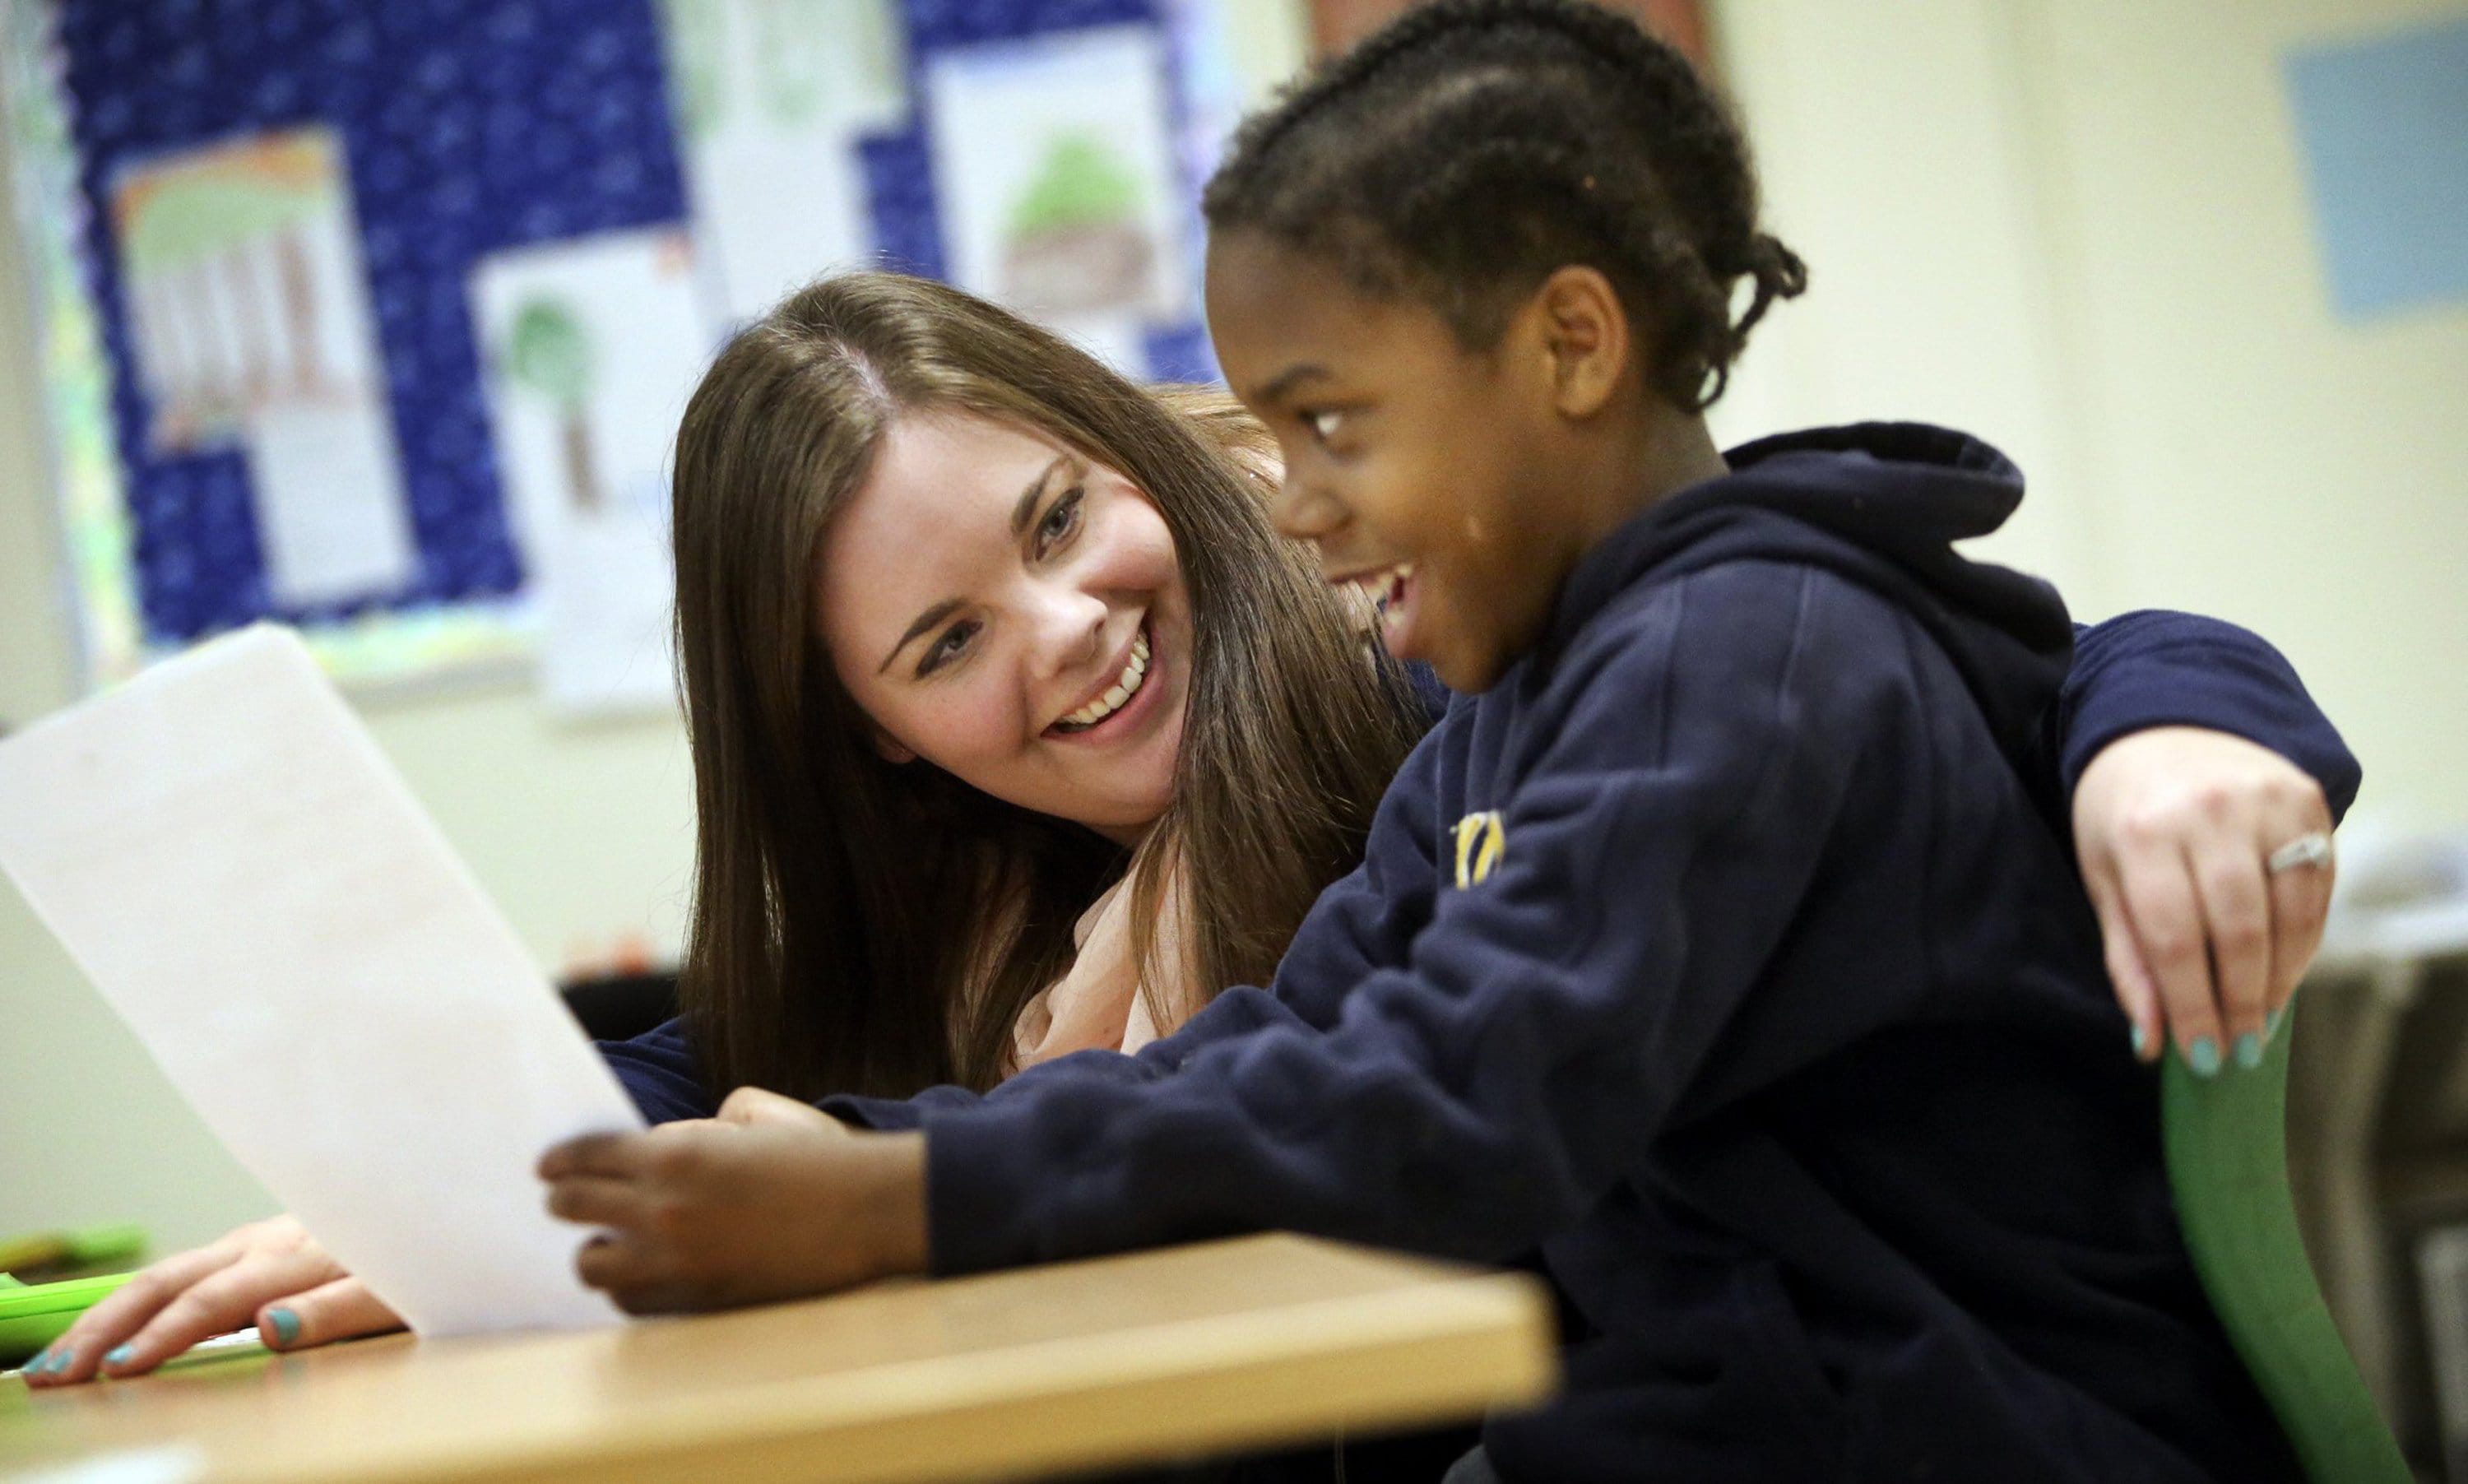 David Joles/Minneapolis Star Tribune
Samantha Ovadal, an education assistant with a bachelor's degree, listens to a student April 22 at John Glenn Alternative Learning Program in Maplewood, Minn.